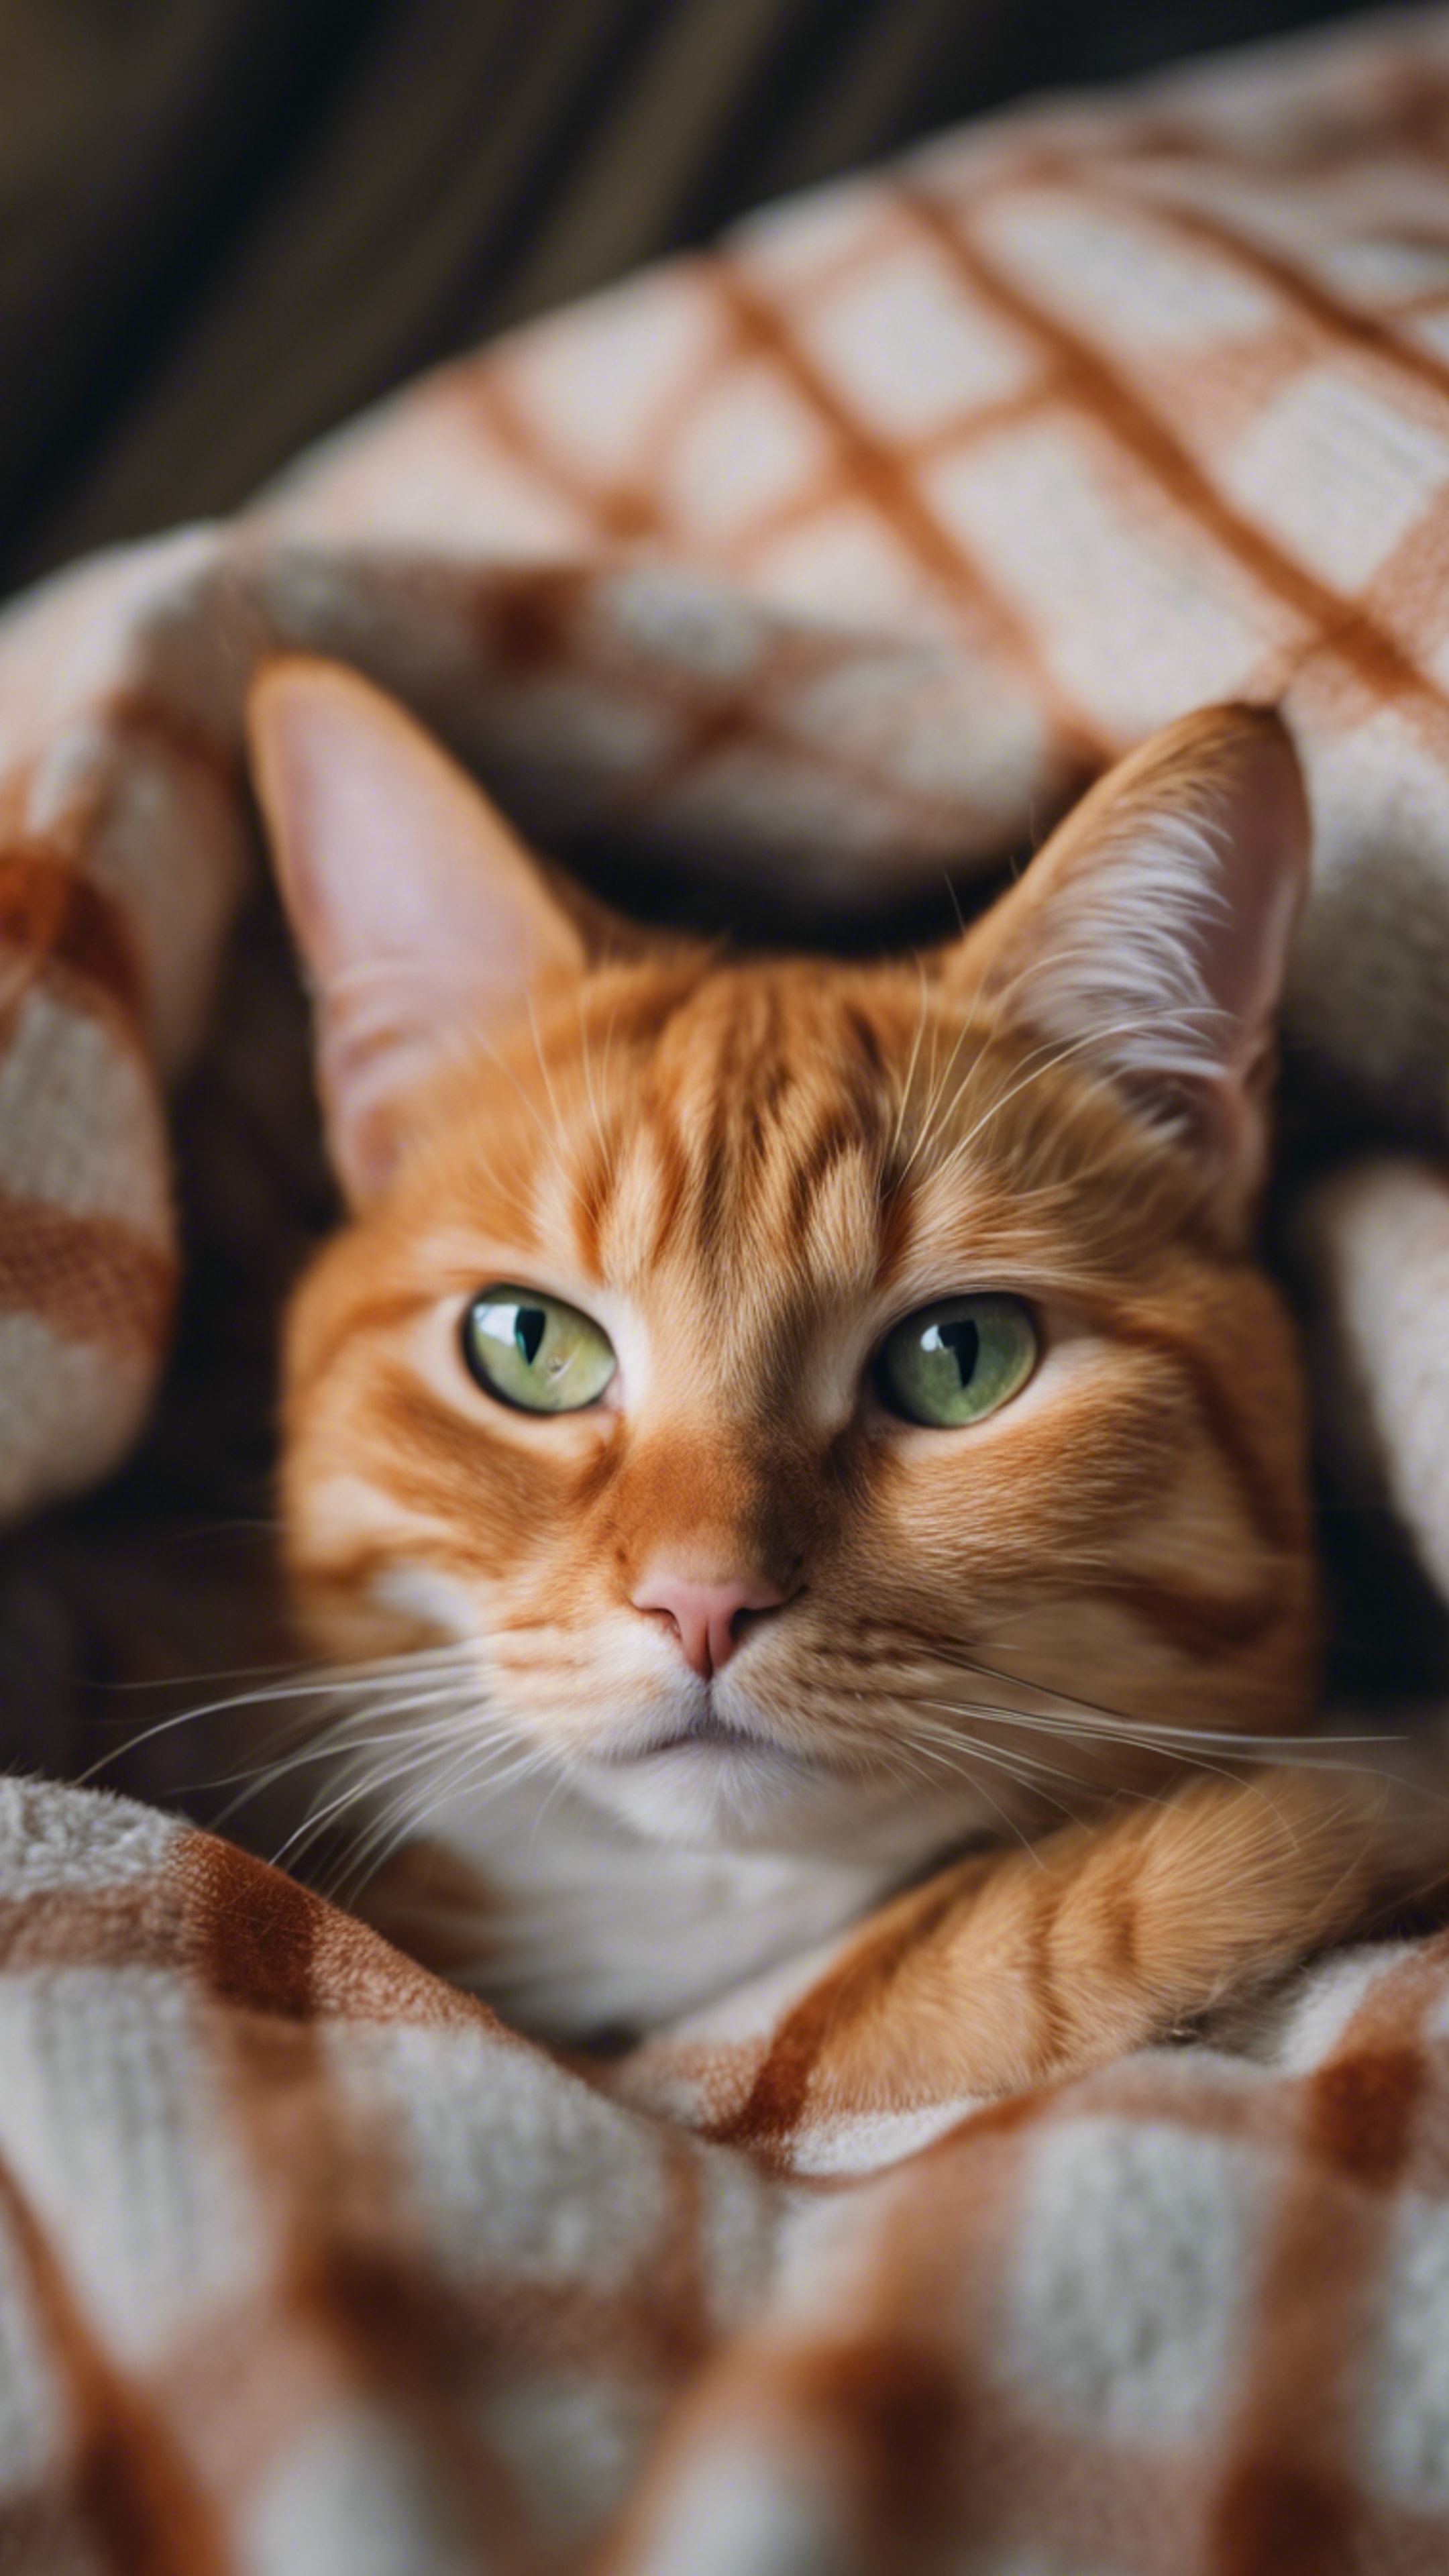 A close up of an orange tabby cat curled up on a cozy plaid blanket, purring gently, with a playful glint in its eyes. Tapetai[45e4538616504ff6a891]